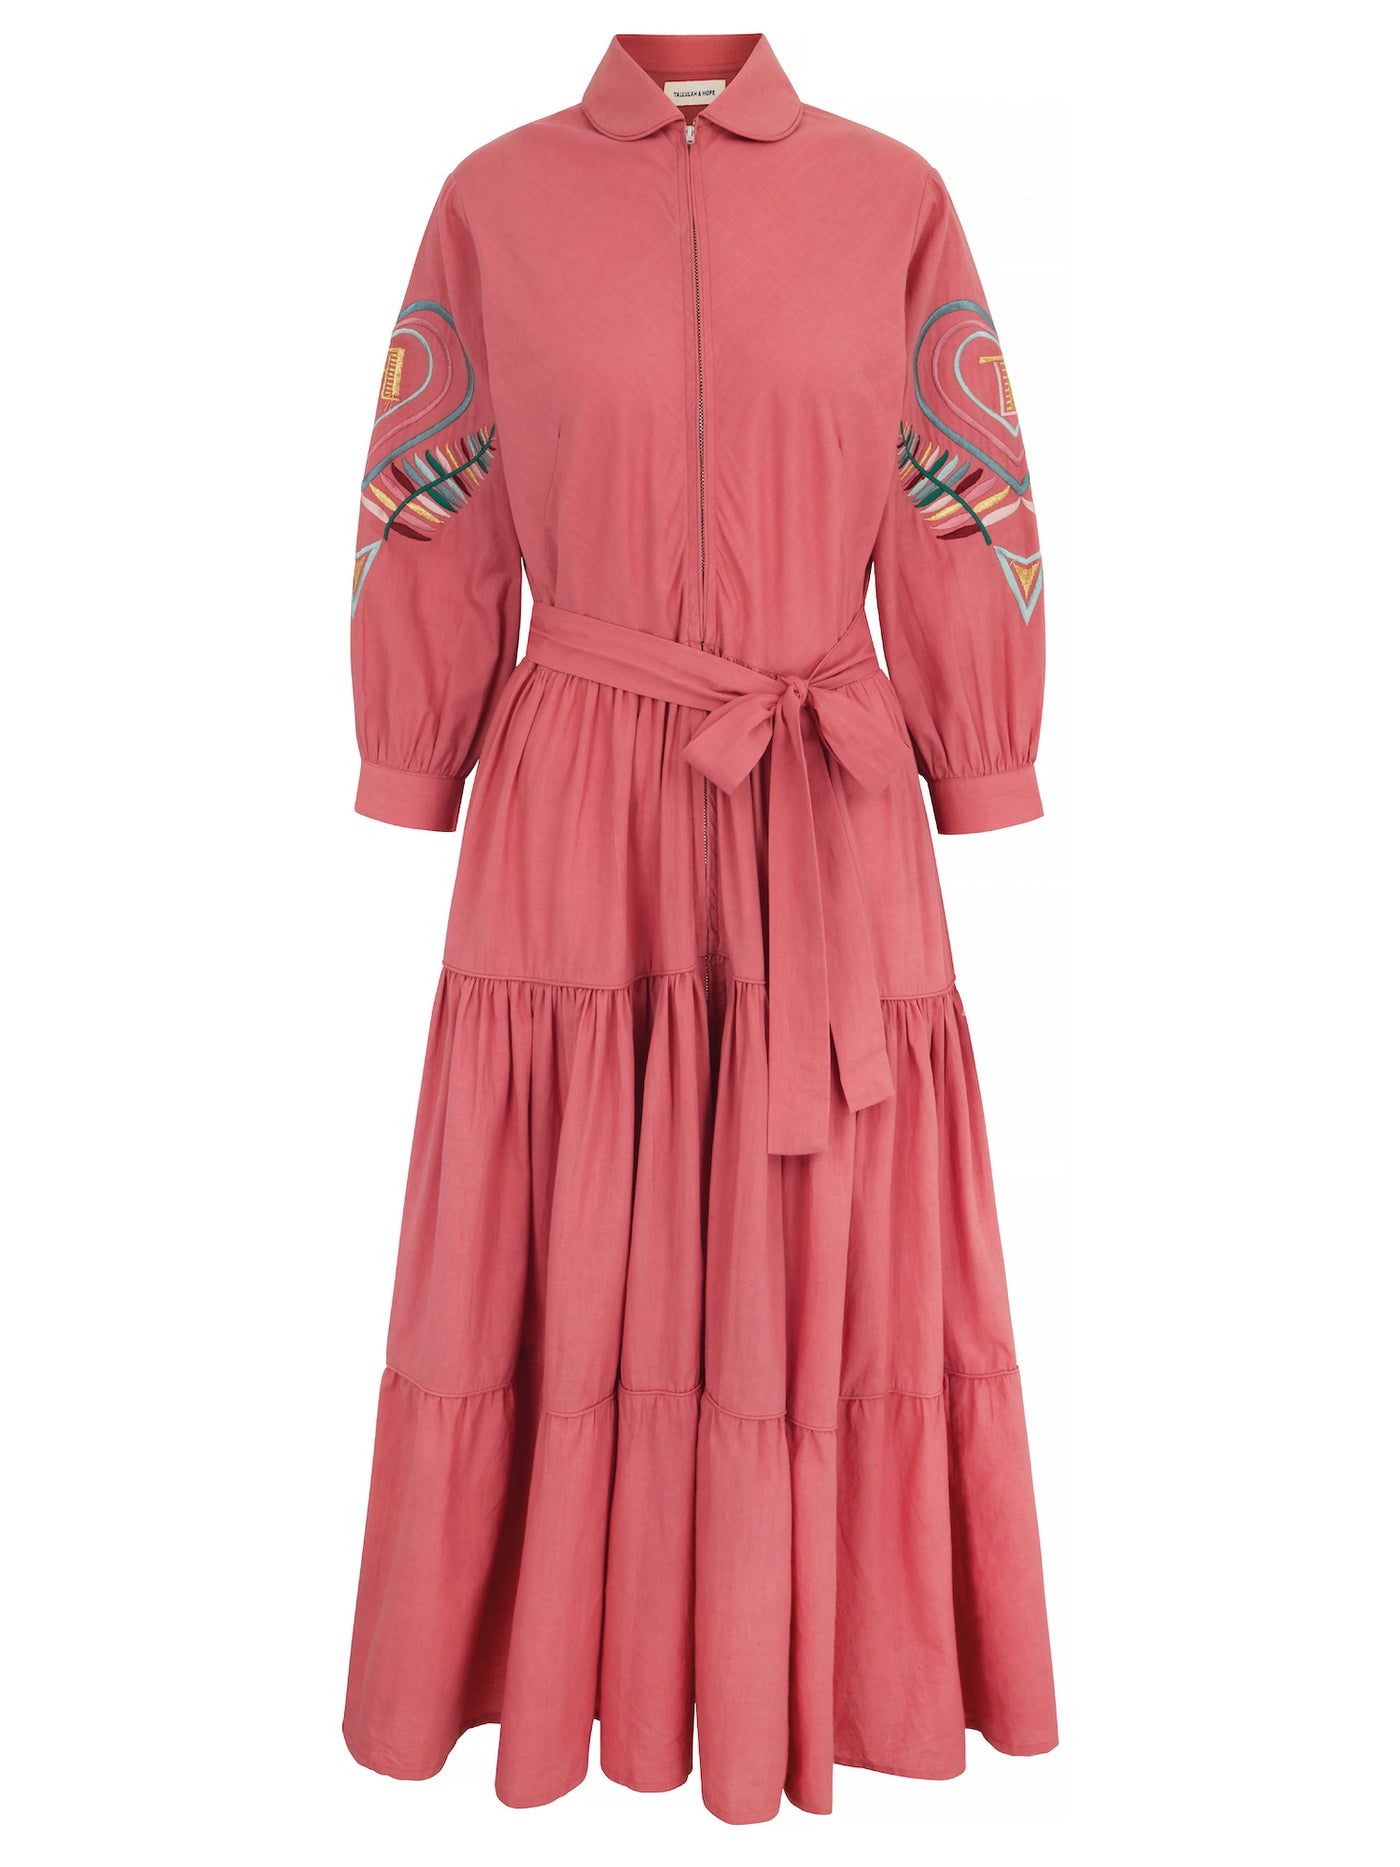 Zip front dress pink embroidered